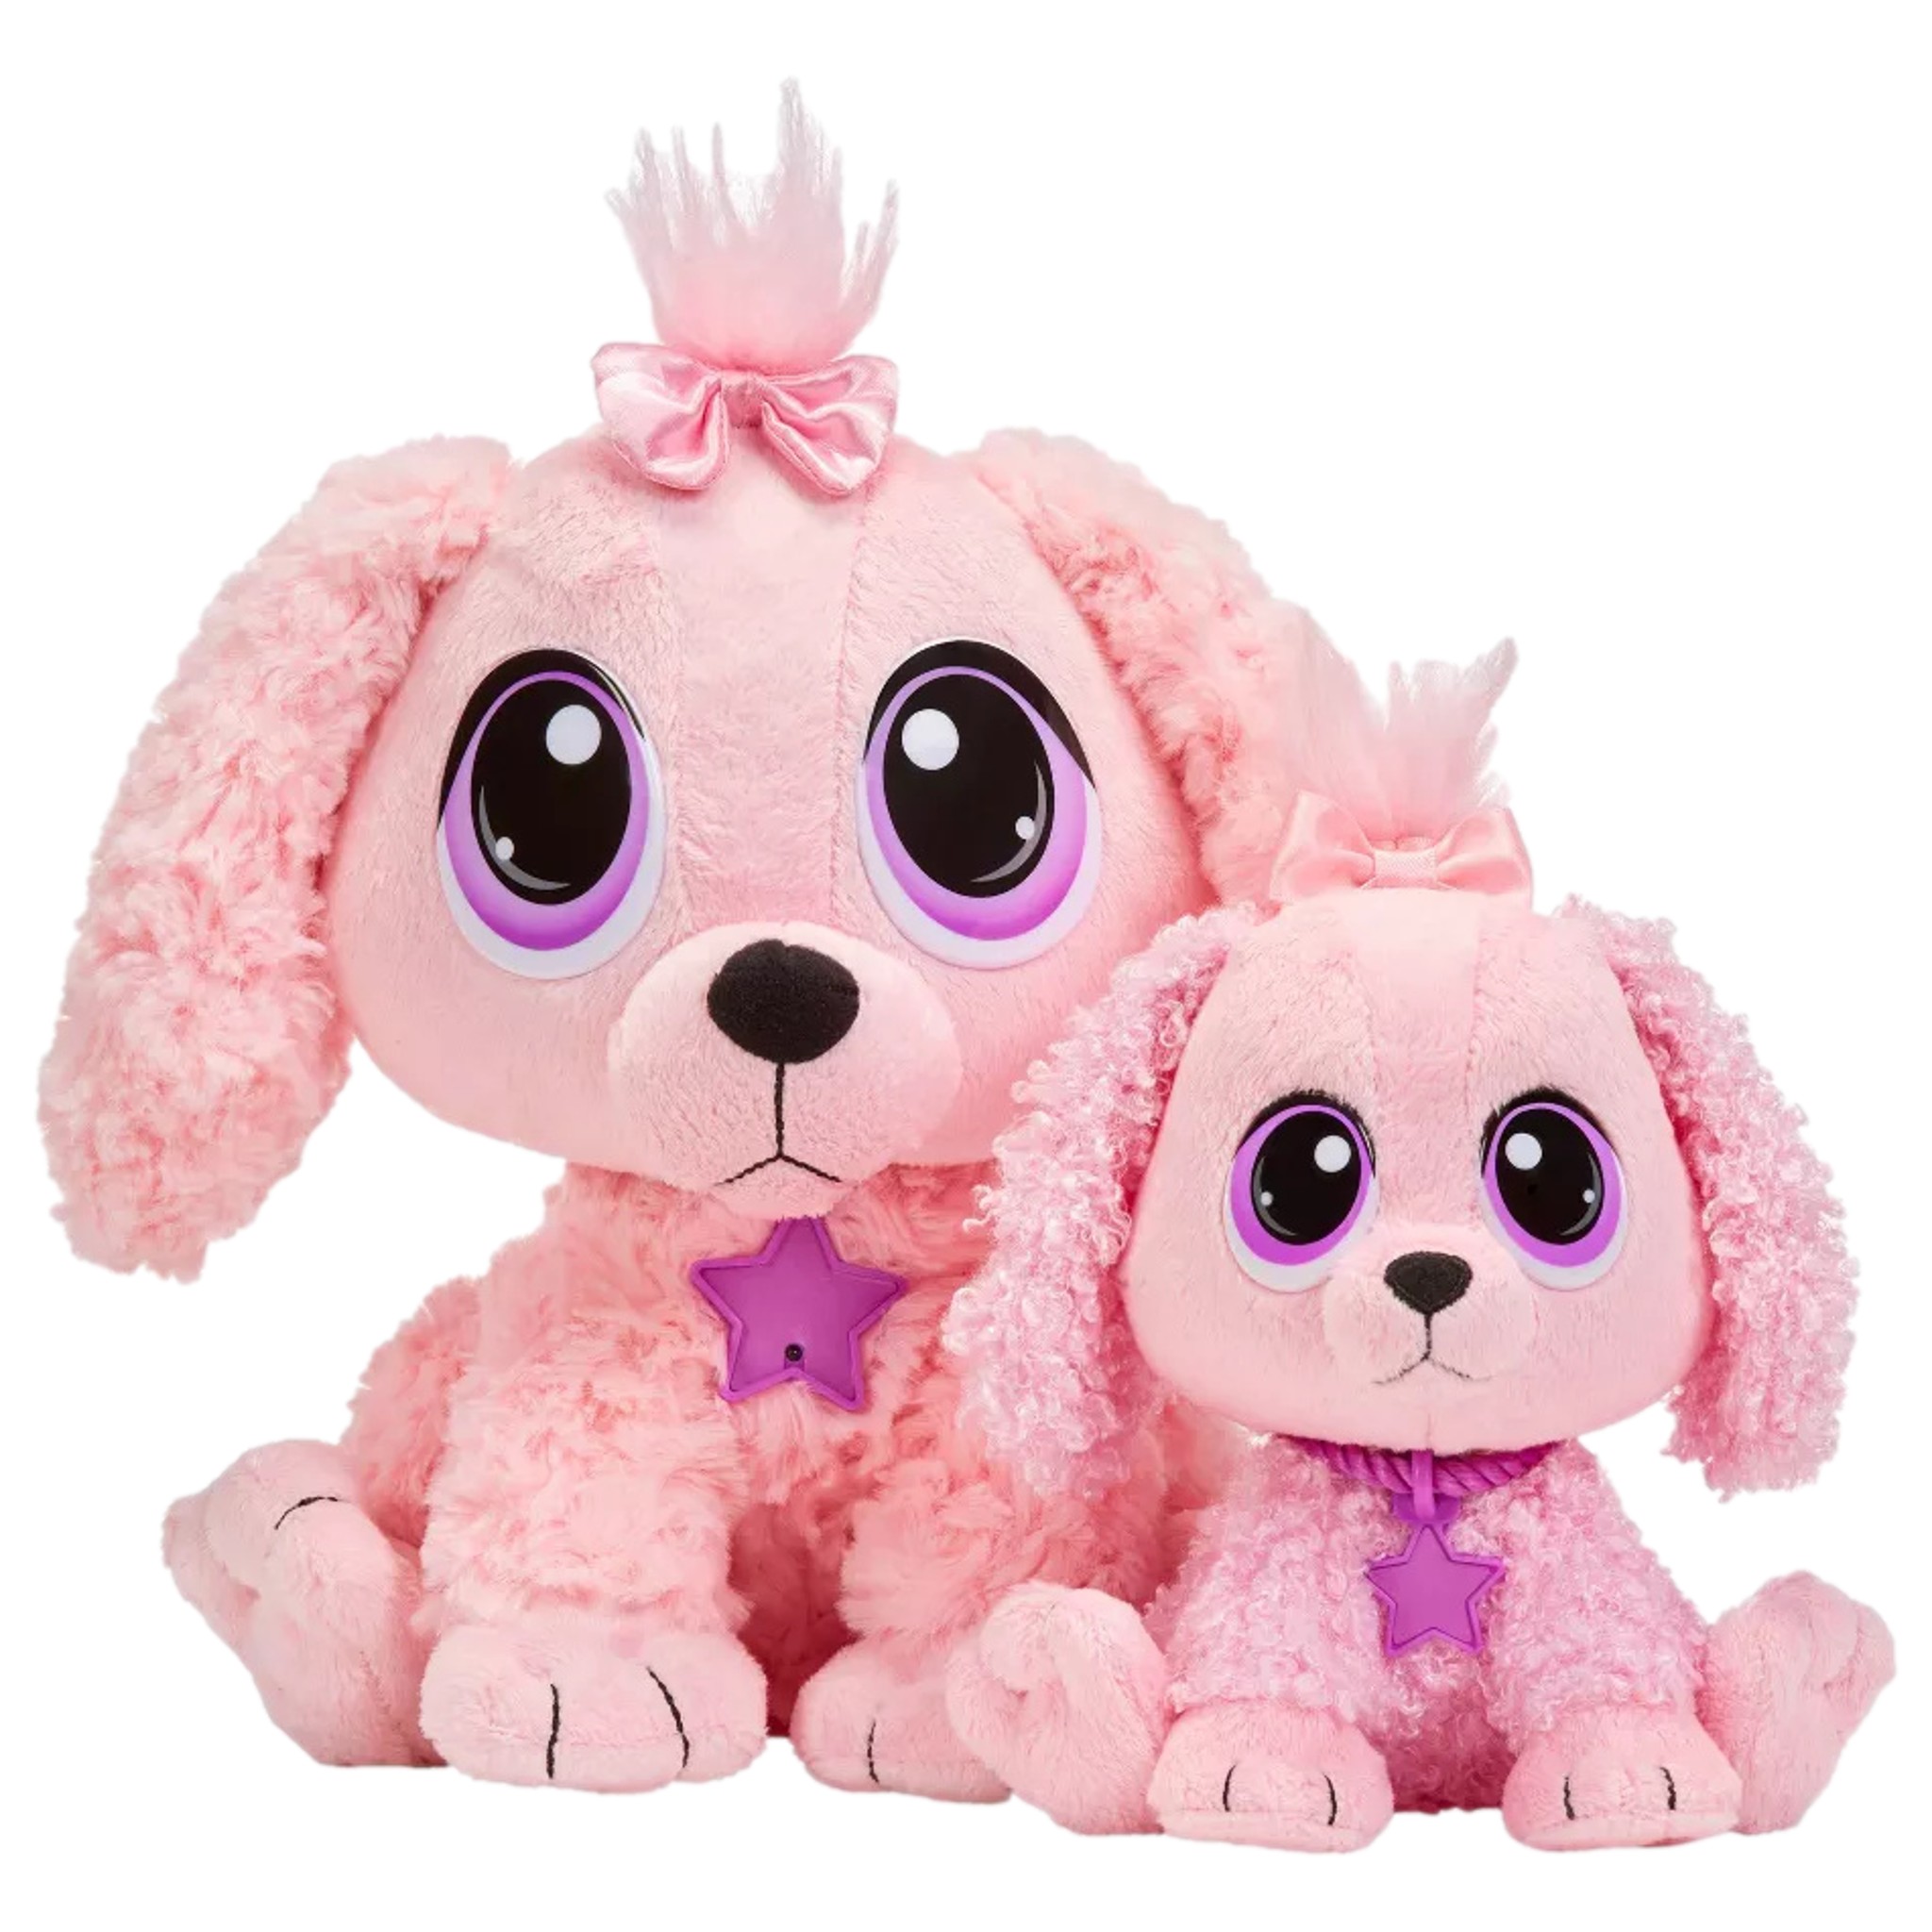 Little Tikes Rescue Tales Adoptable Mom & Pup Plush Pink Poodle Dogs Stuffed Animal Pals